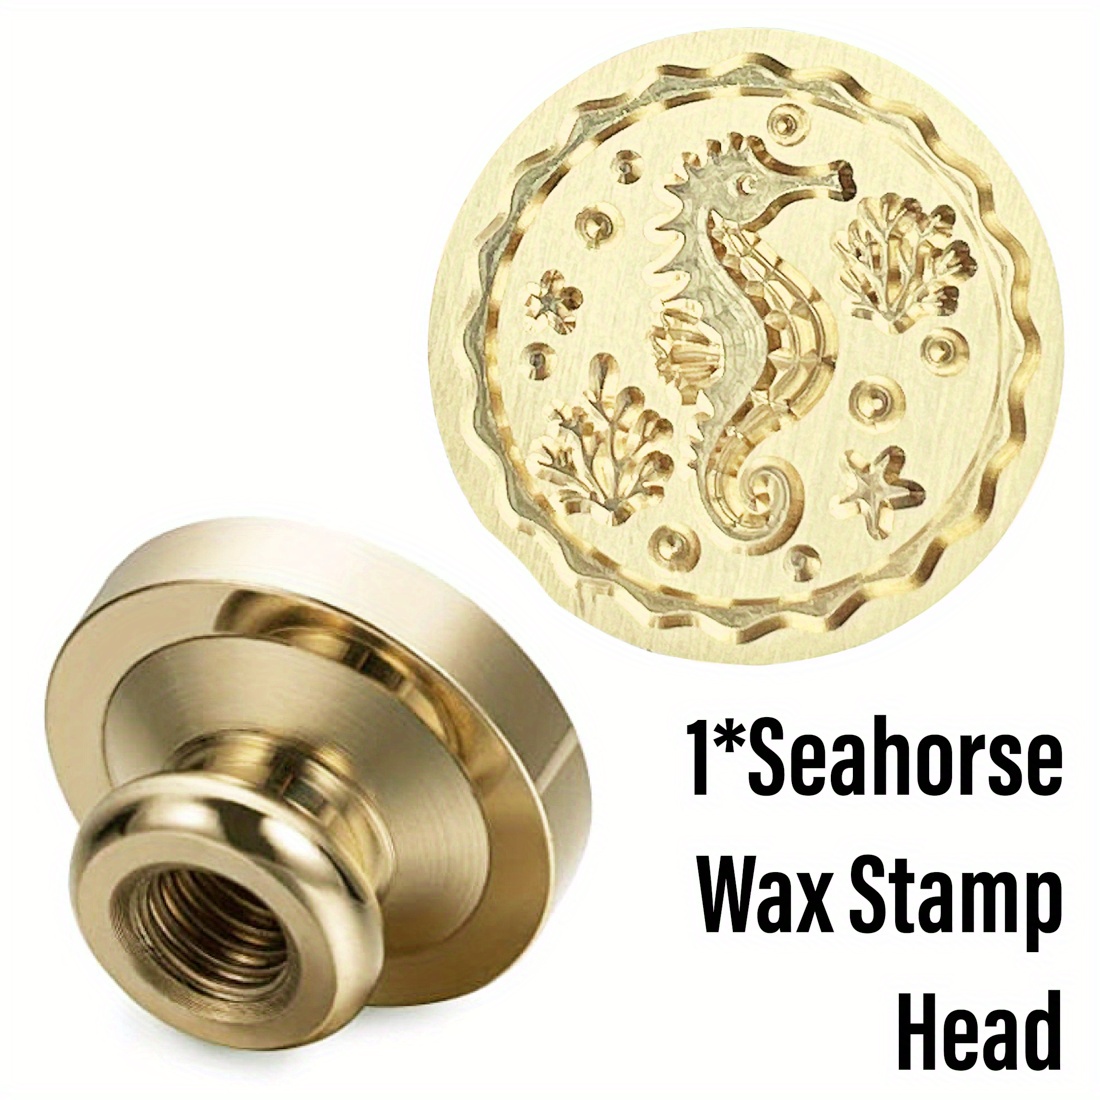 1pc Wax Seal Stamp Head 25mm Removable Brass Sealing Wax Stamp